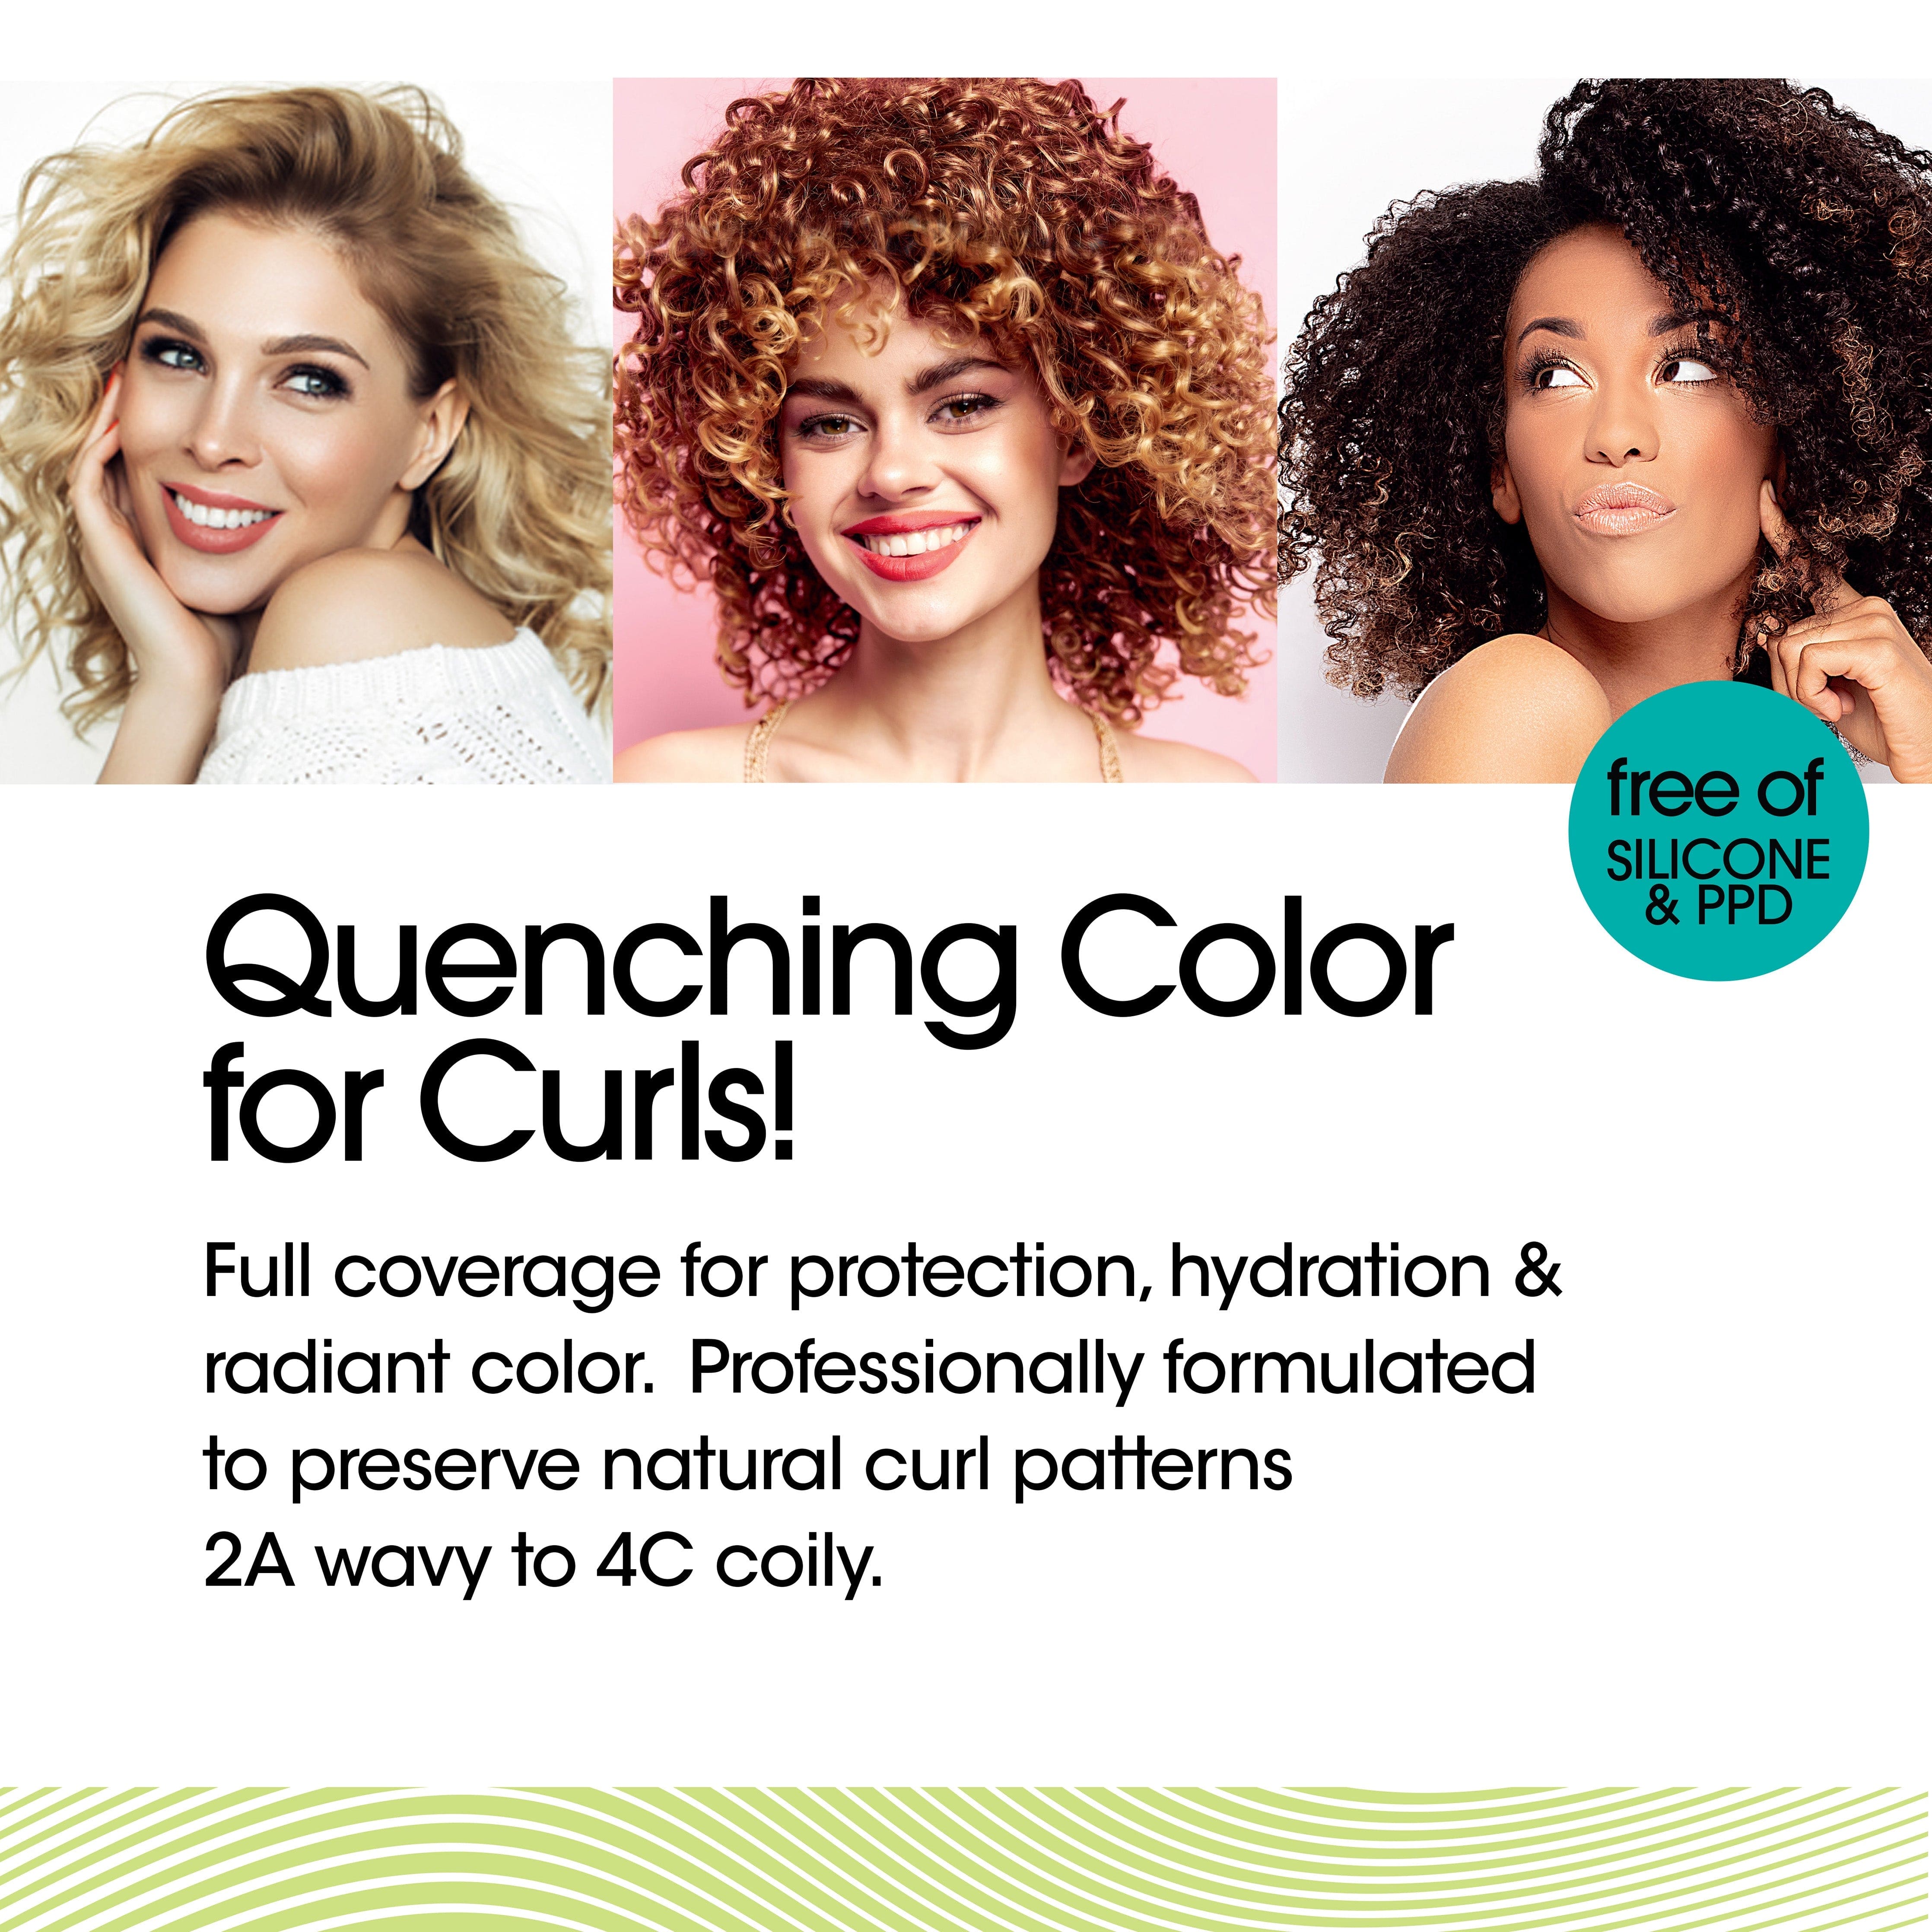 All About Curls? Quenching Permanent Haircolor For Curls - Red